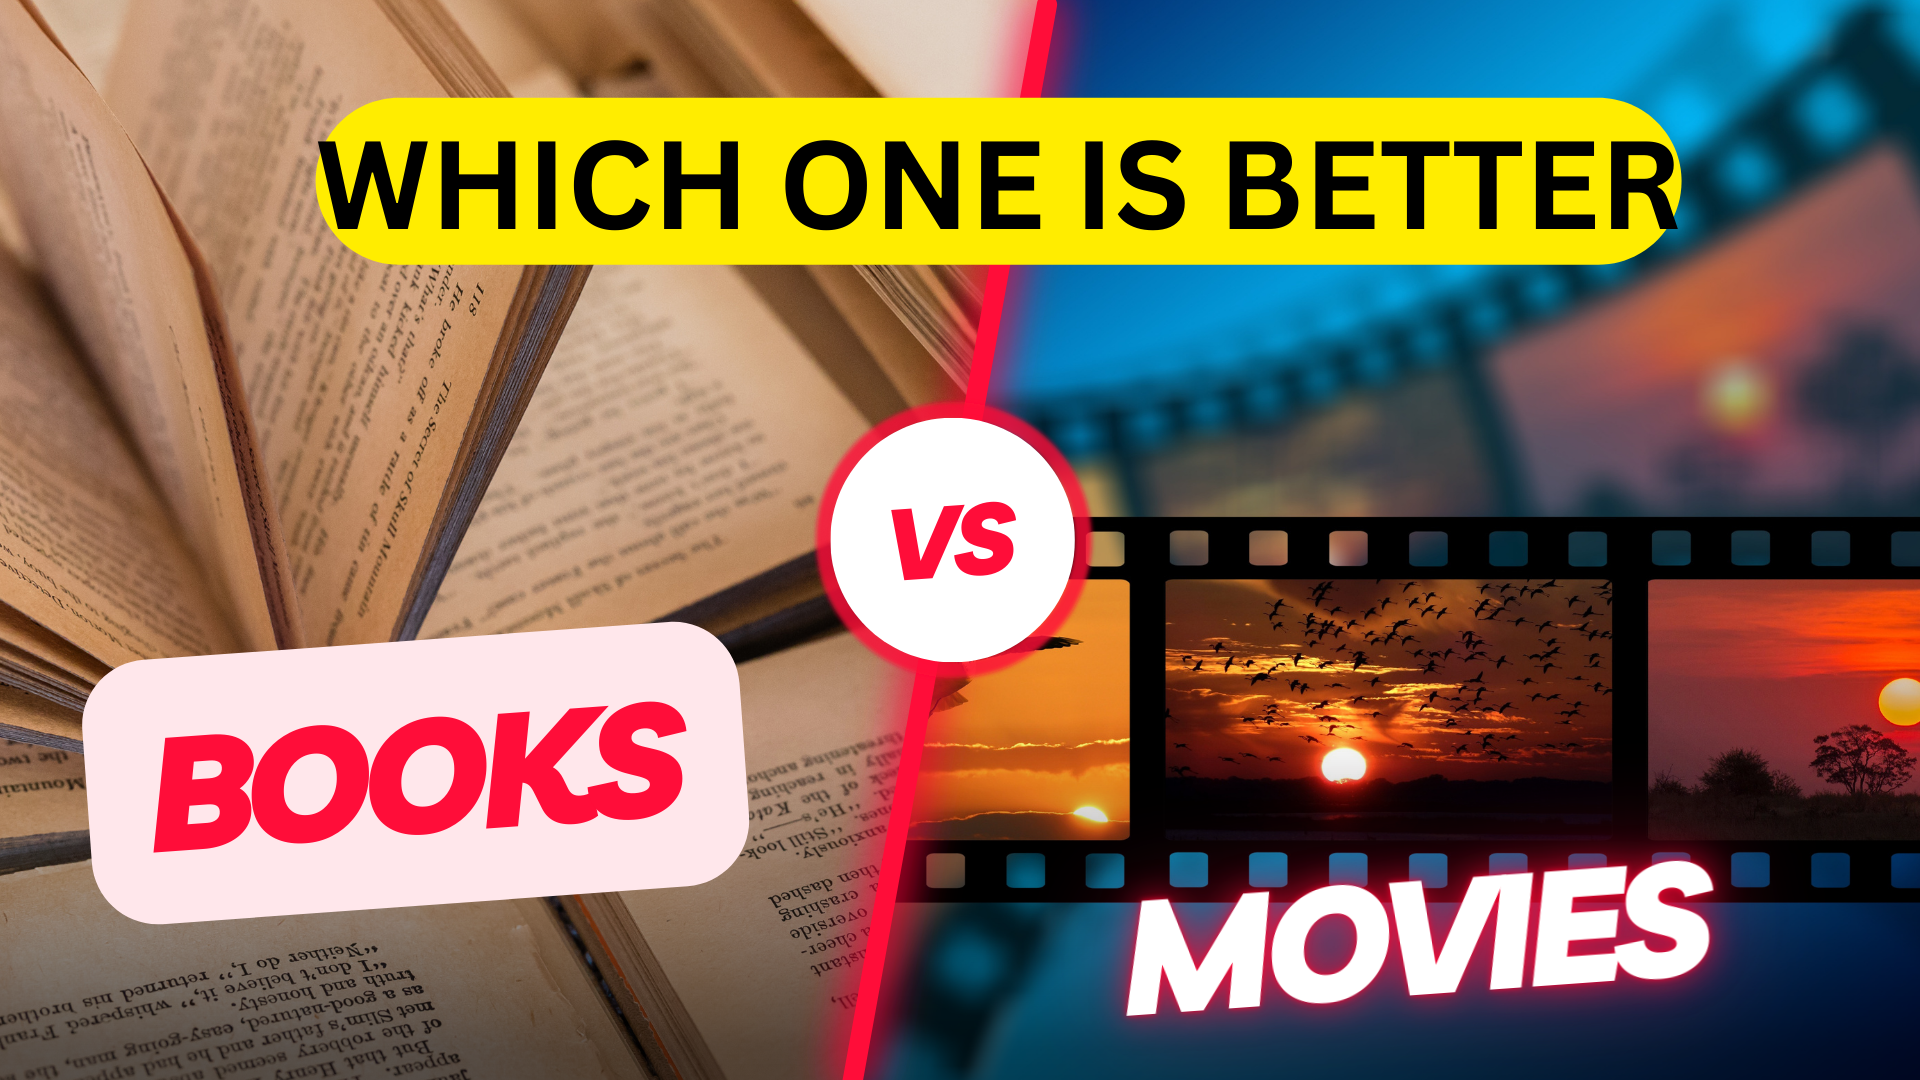 Books or films: which one can represent a story better?